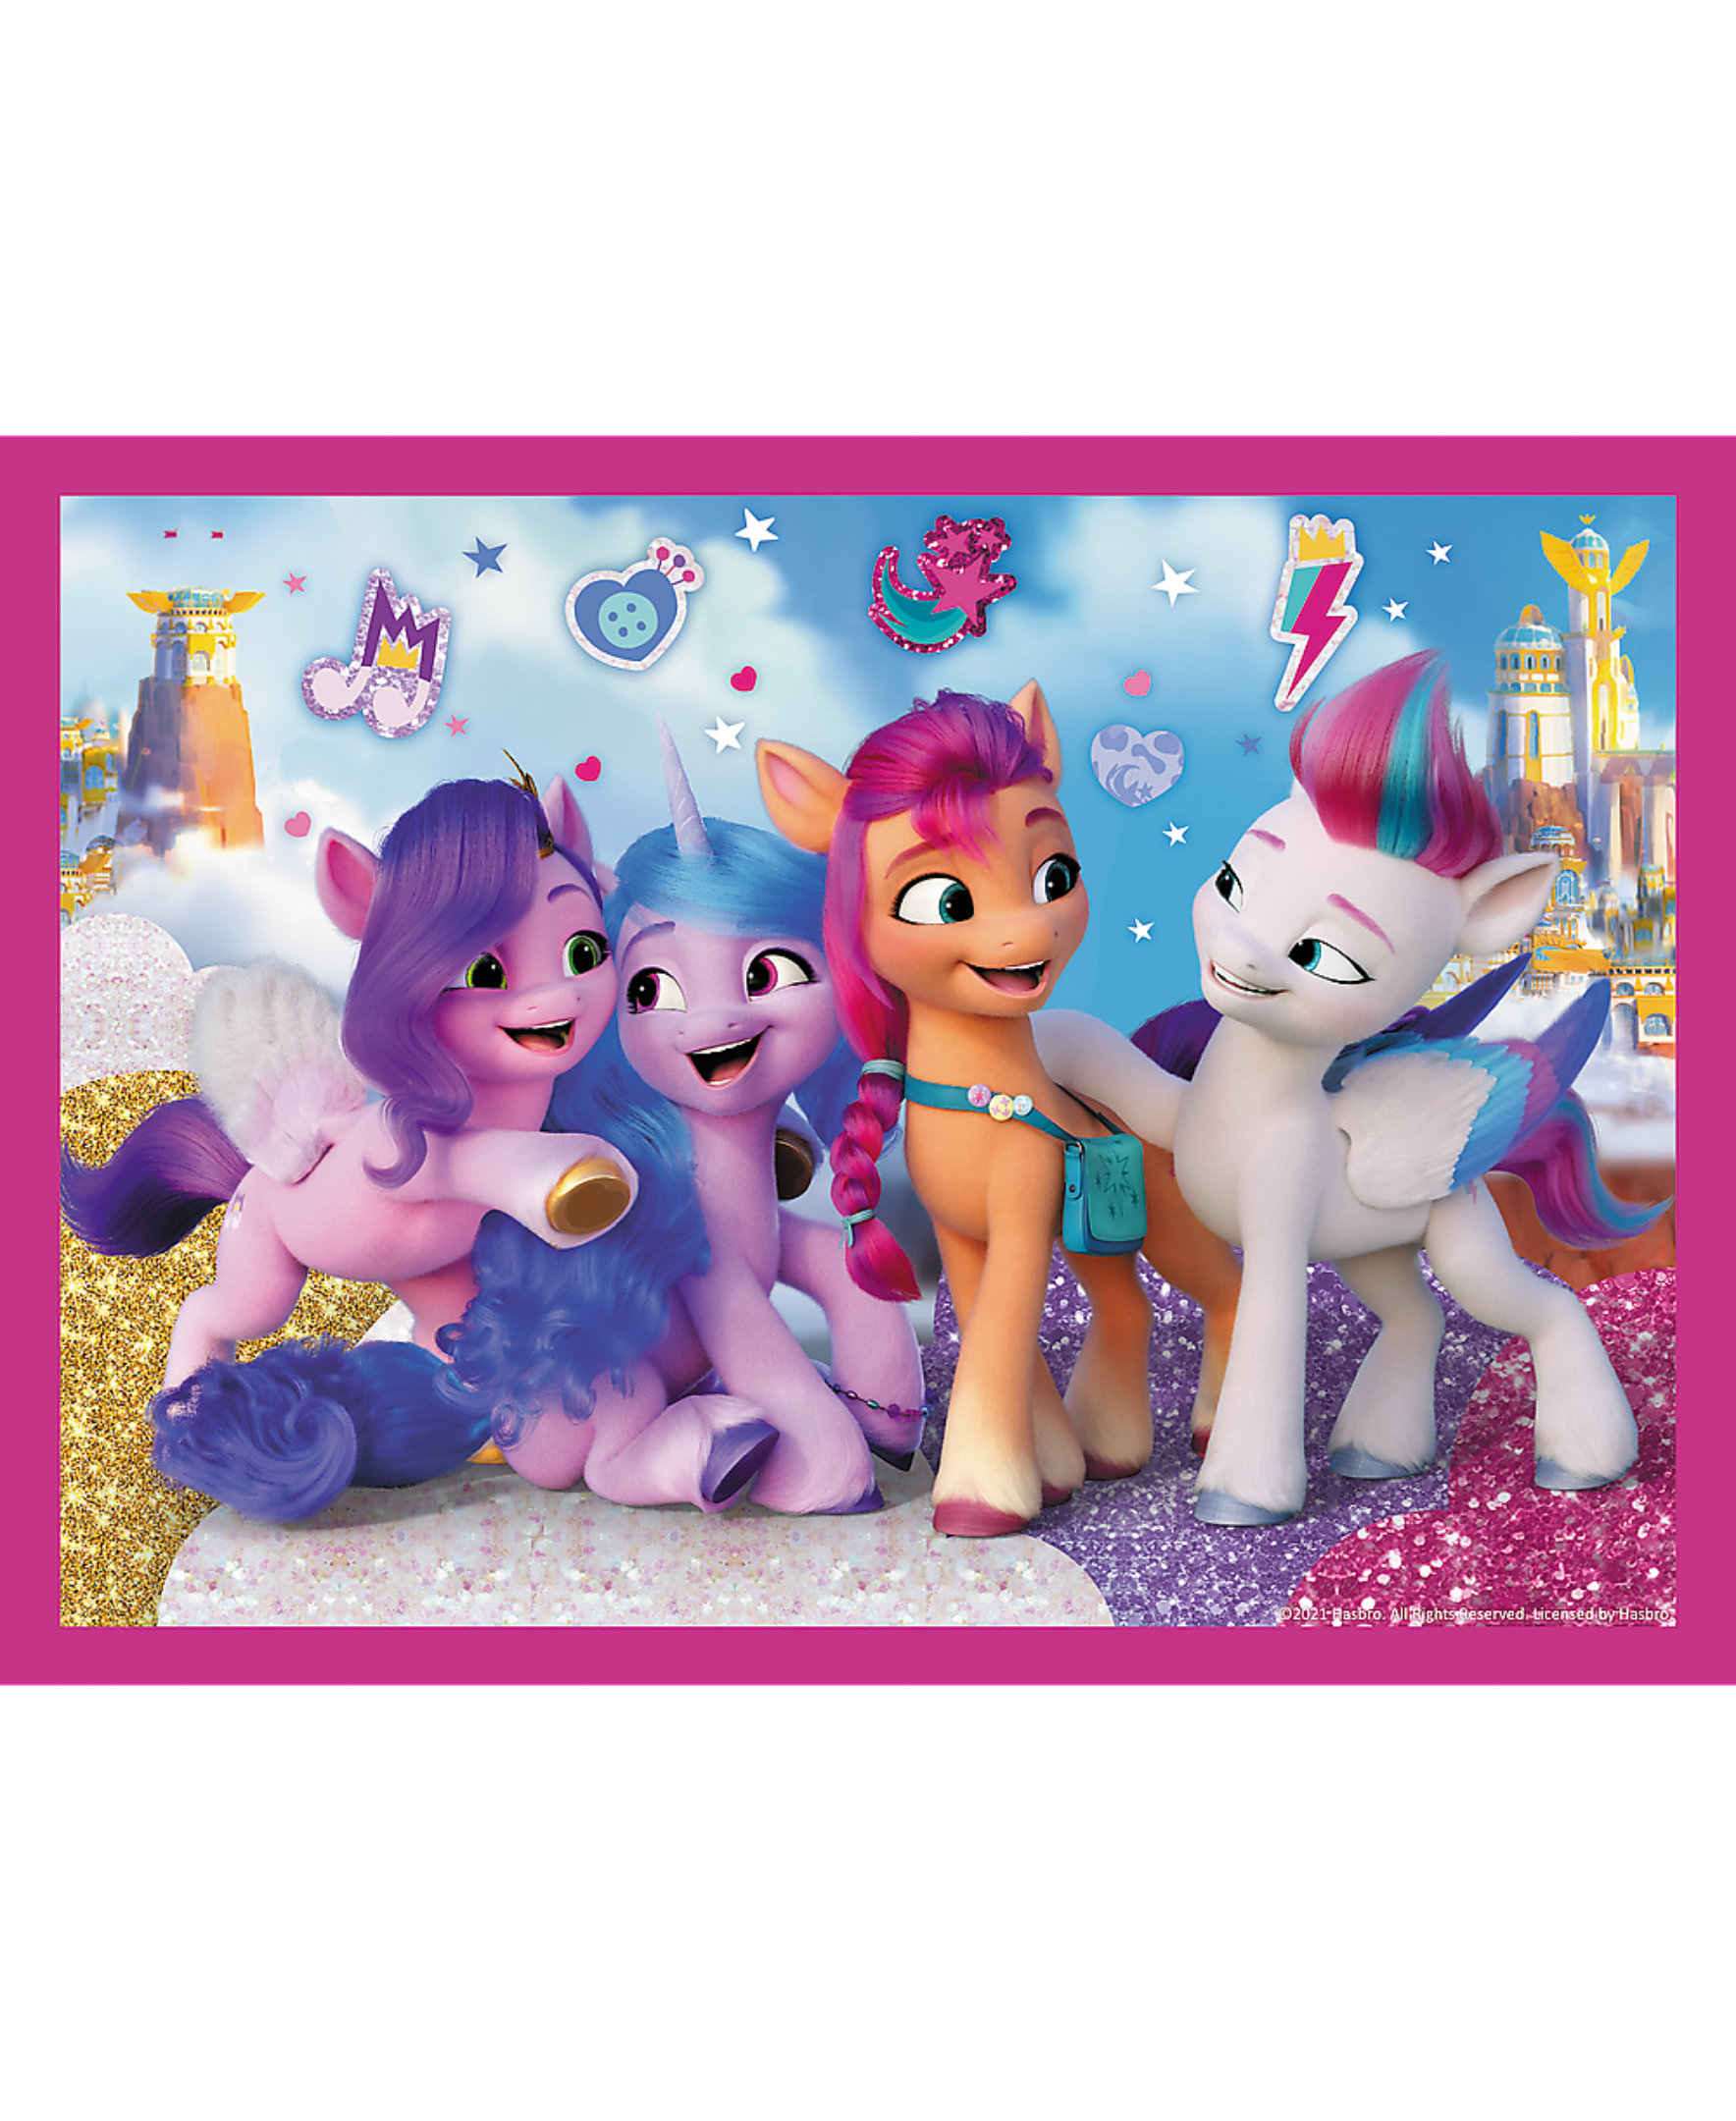 Trefl Red 4 in 1 Puzzle - My Little Pony - Colorful Ponies